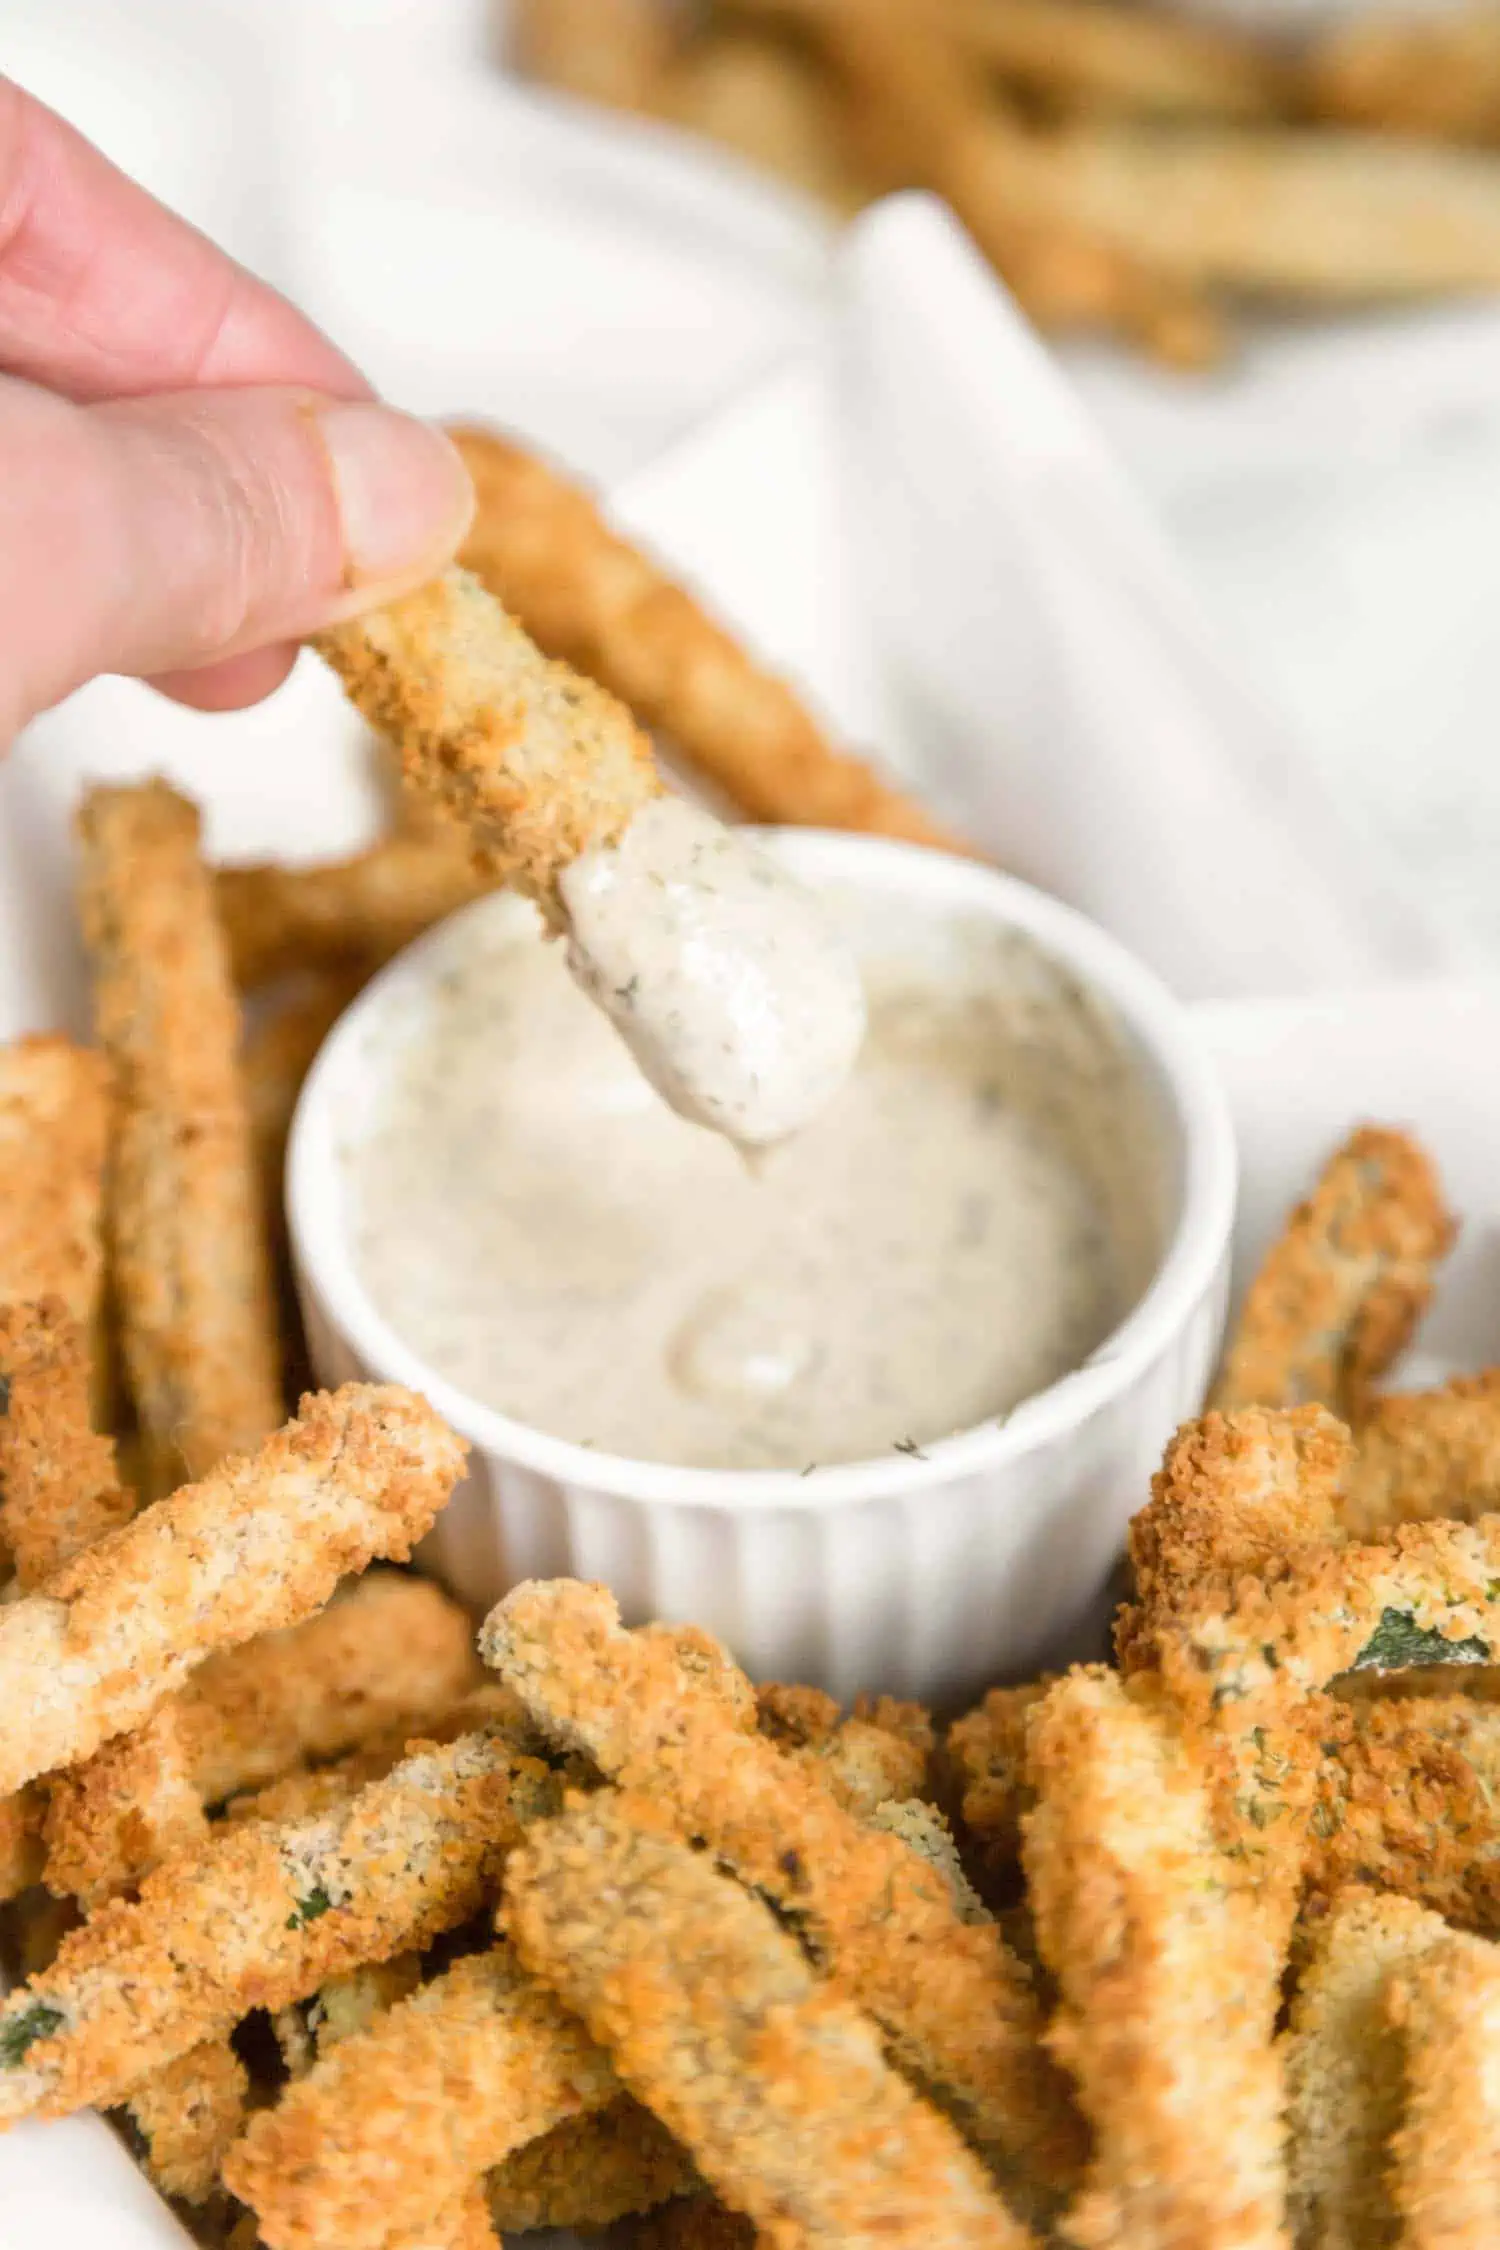 Hand holding a zucchini fry and dipping it into a creamy sauce.